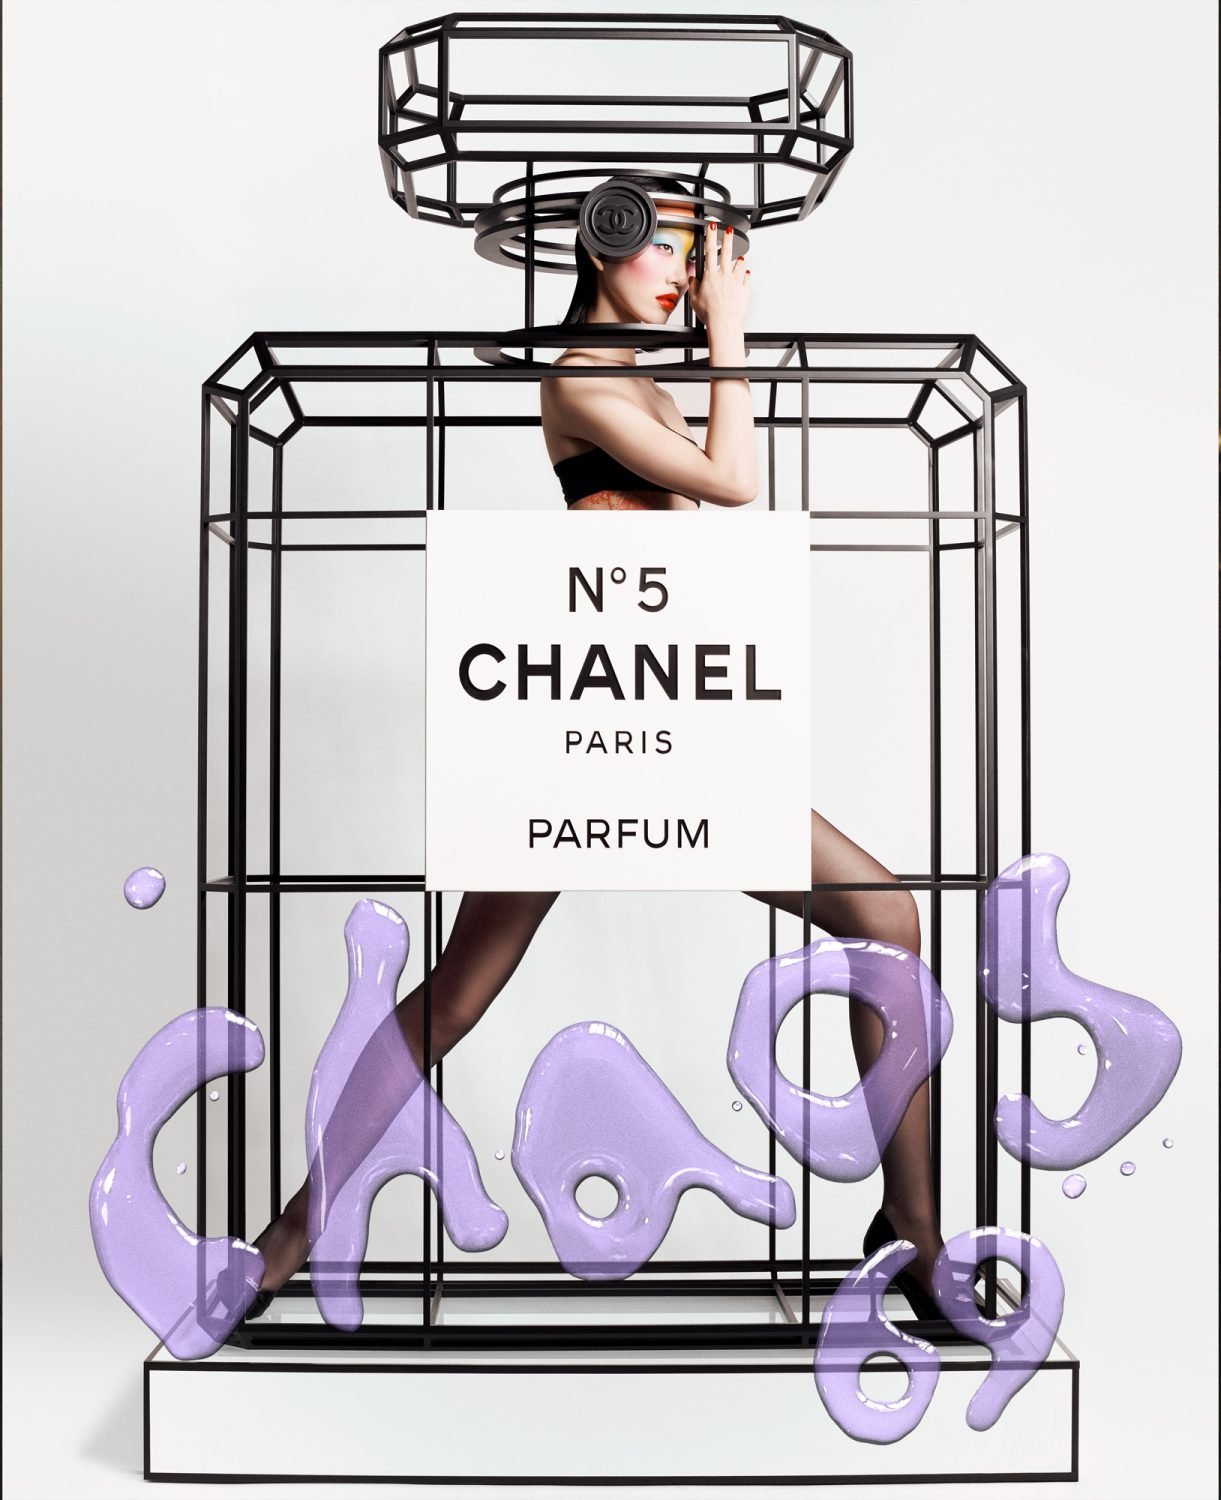 Chaos SixtyNine No5: The Chanel Issue Covers (Chaos SixtyNine)